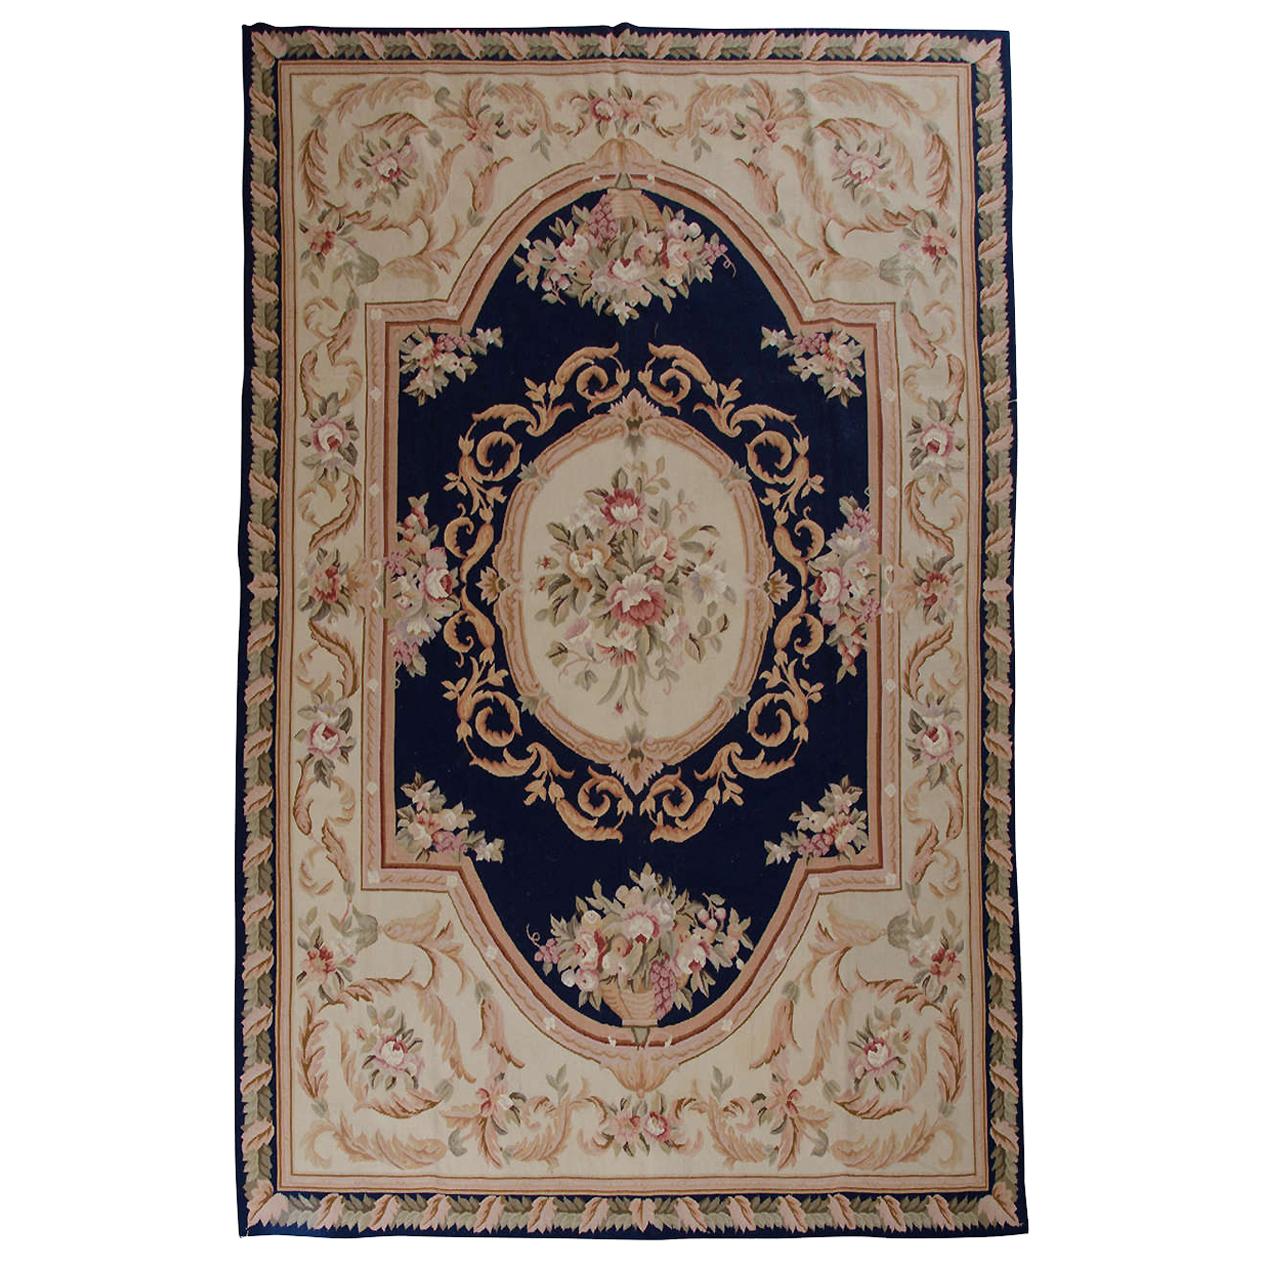 Handmade Aubusson Style Rugs, Floral Chinese Carpet Needlepoint Rug